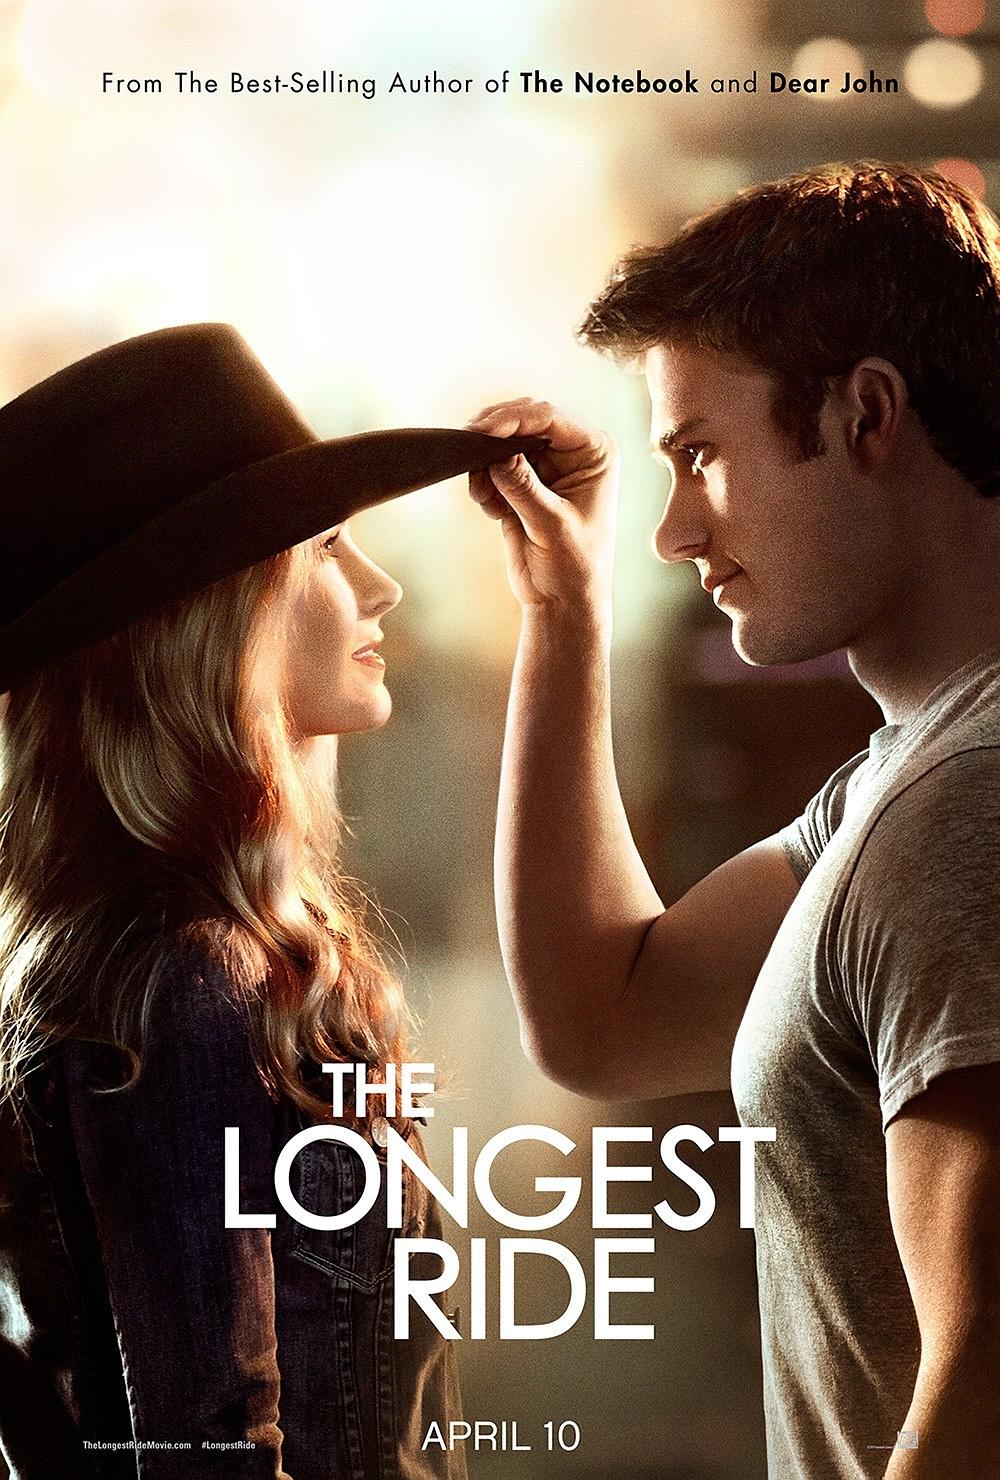 ó/г The.Longest.Ride.2015.1080p.BluRay.x264-SPARKS 9.87GB-1.png